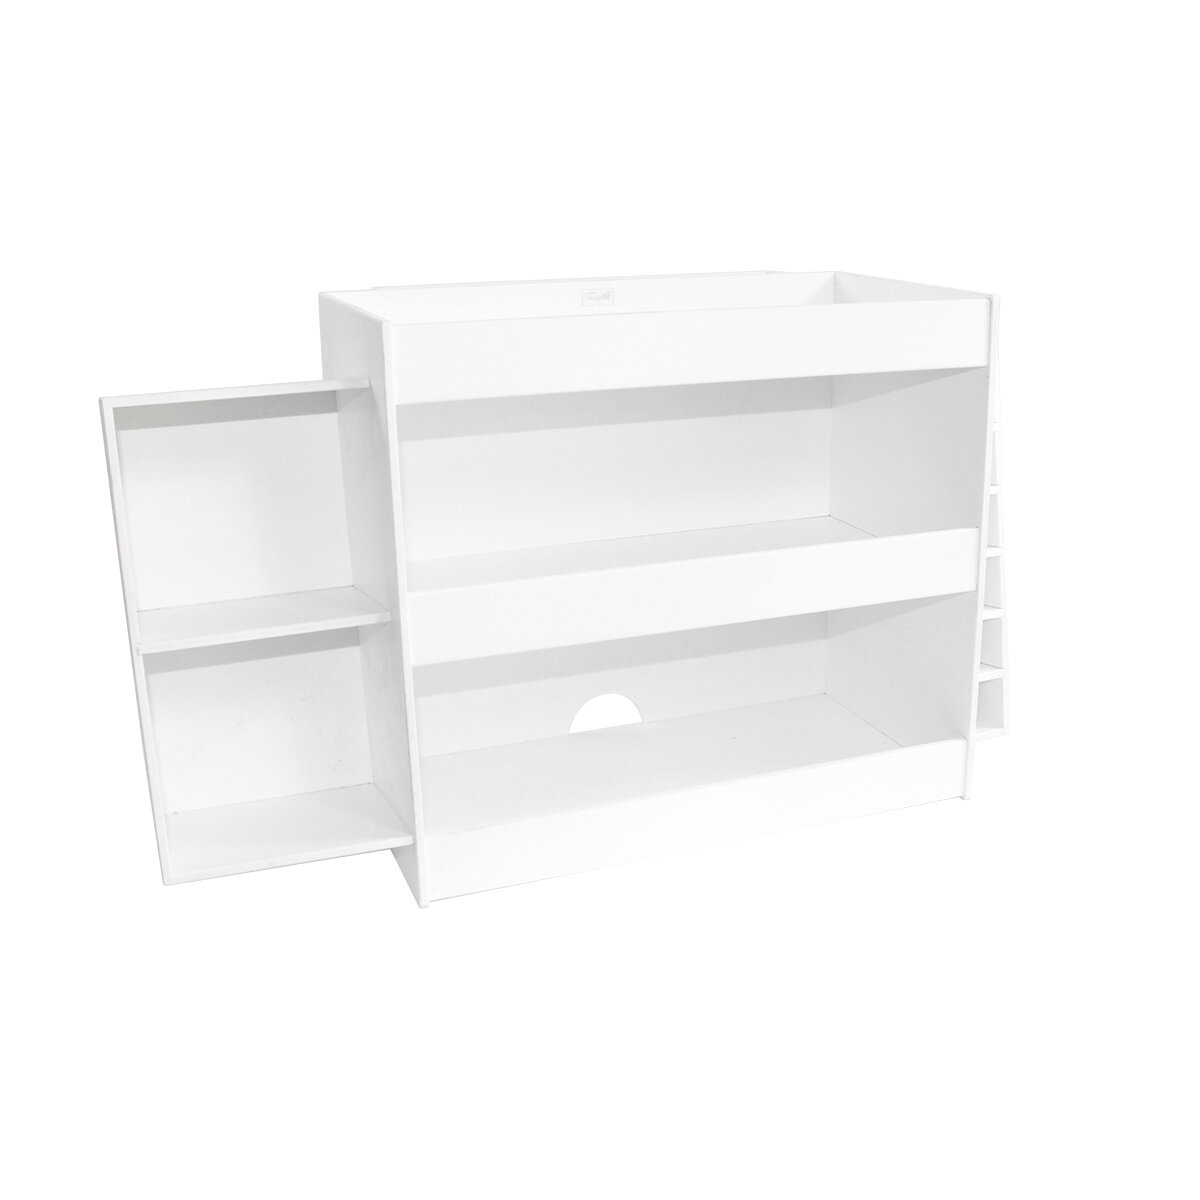 White 12 Width x 12 Height x 9 Depth TrippNT 50106 PVC Angled Triple Safety Shelves with No Door 